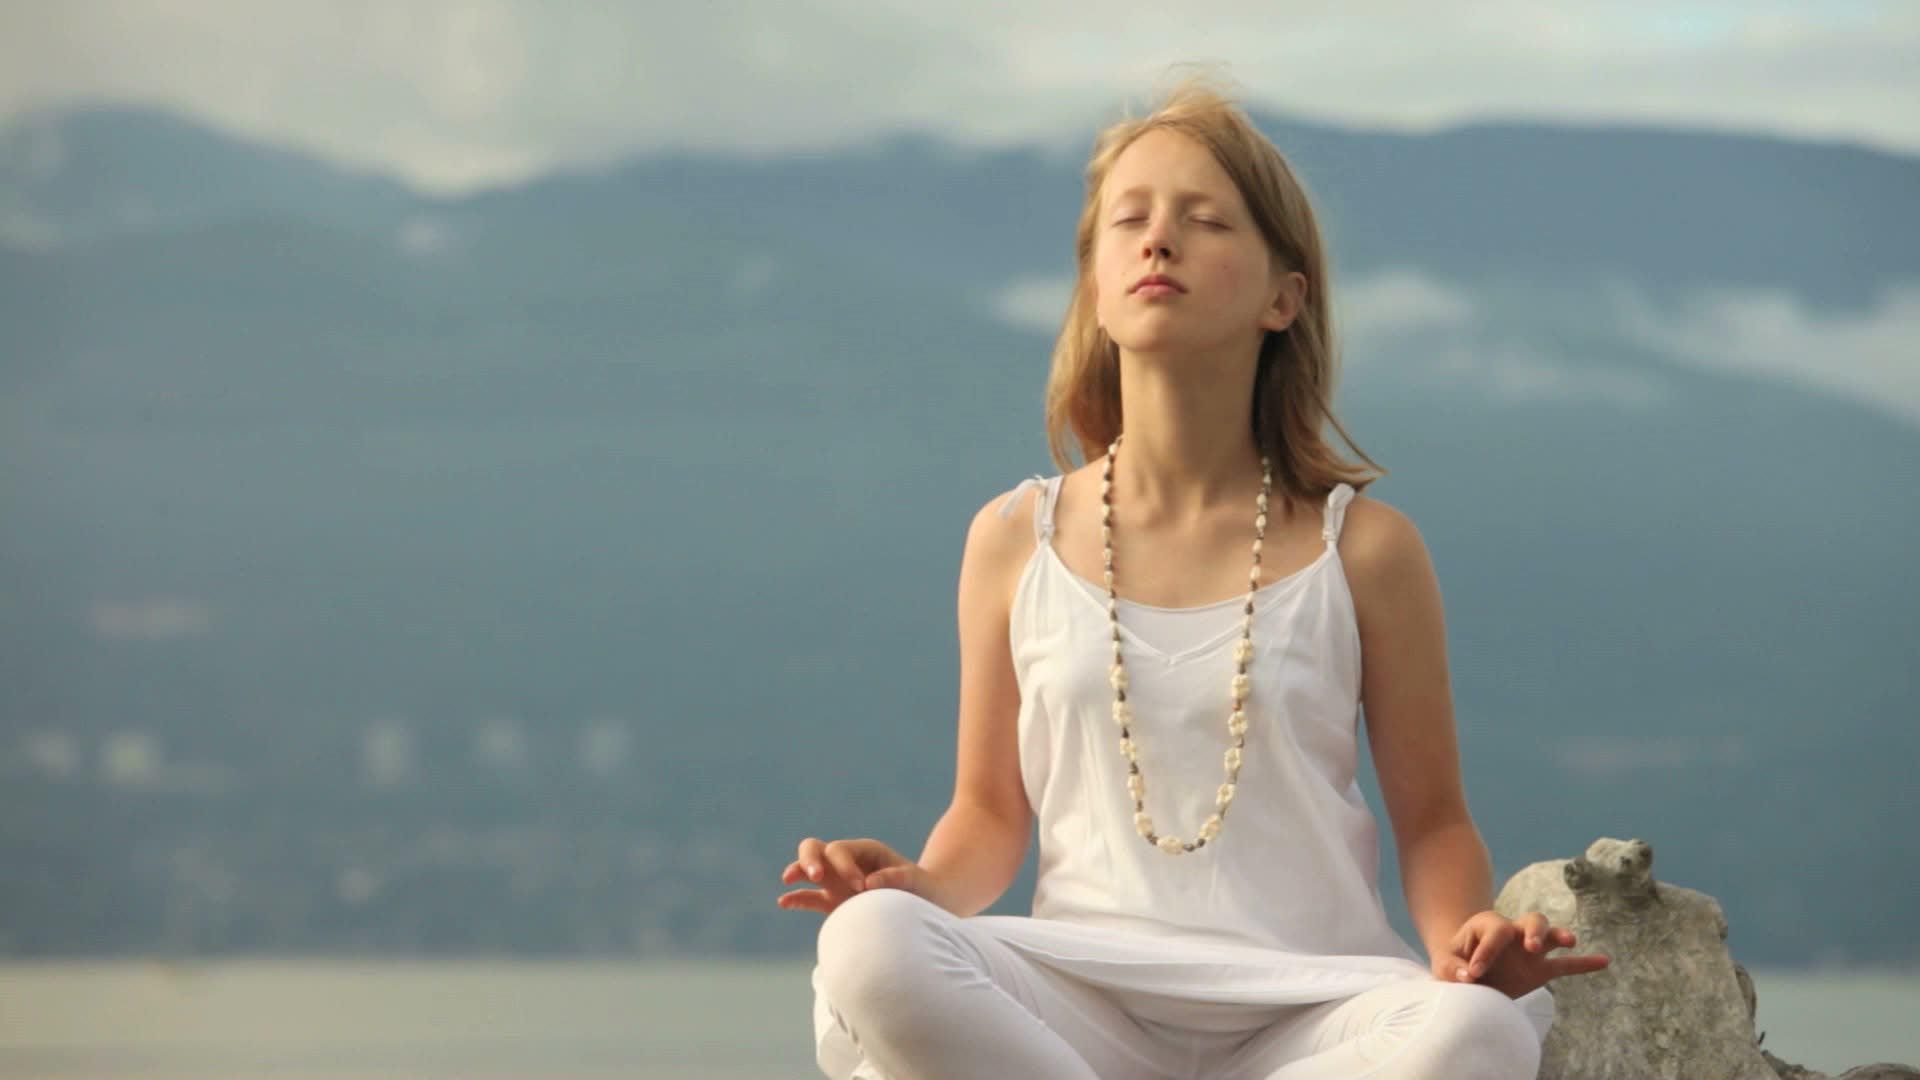 Young Girl Meditating And Yoga For Mindrelax Image Photo Download